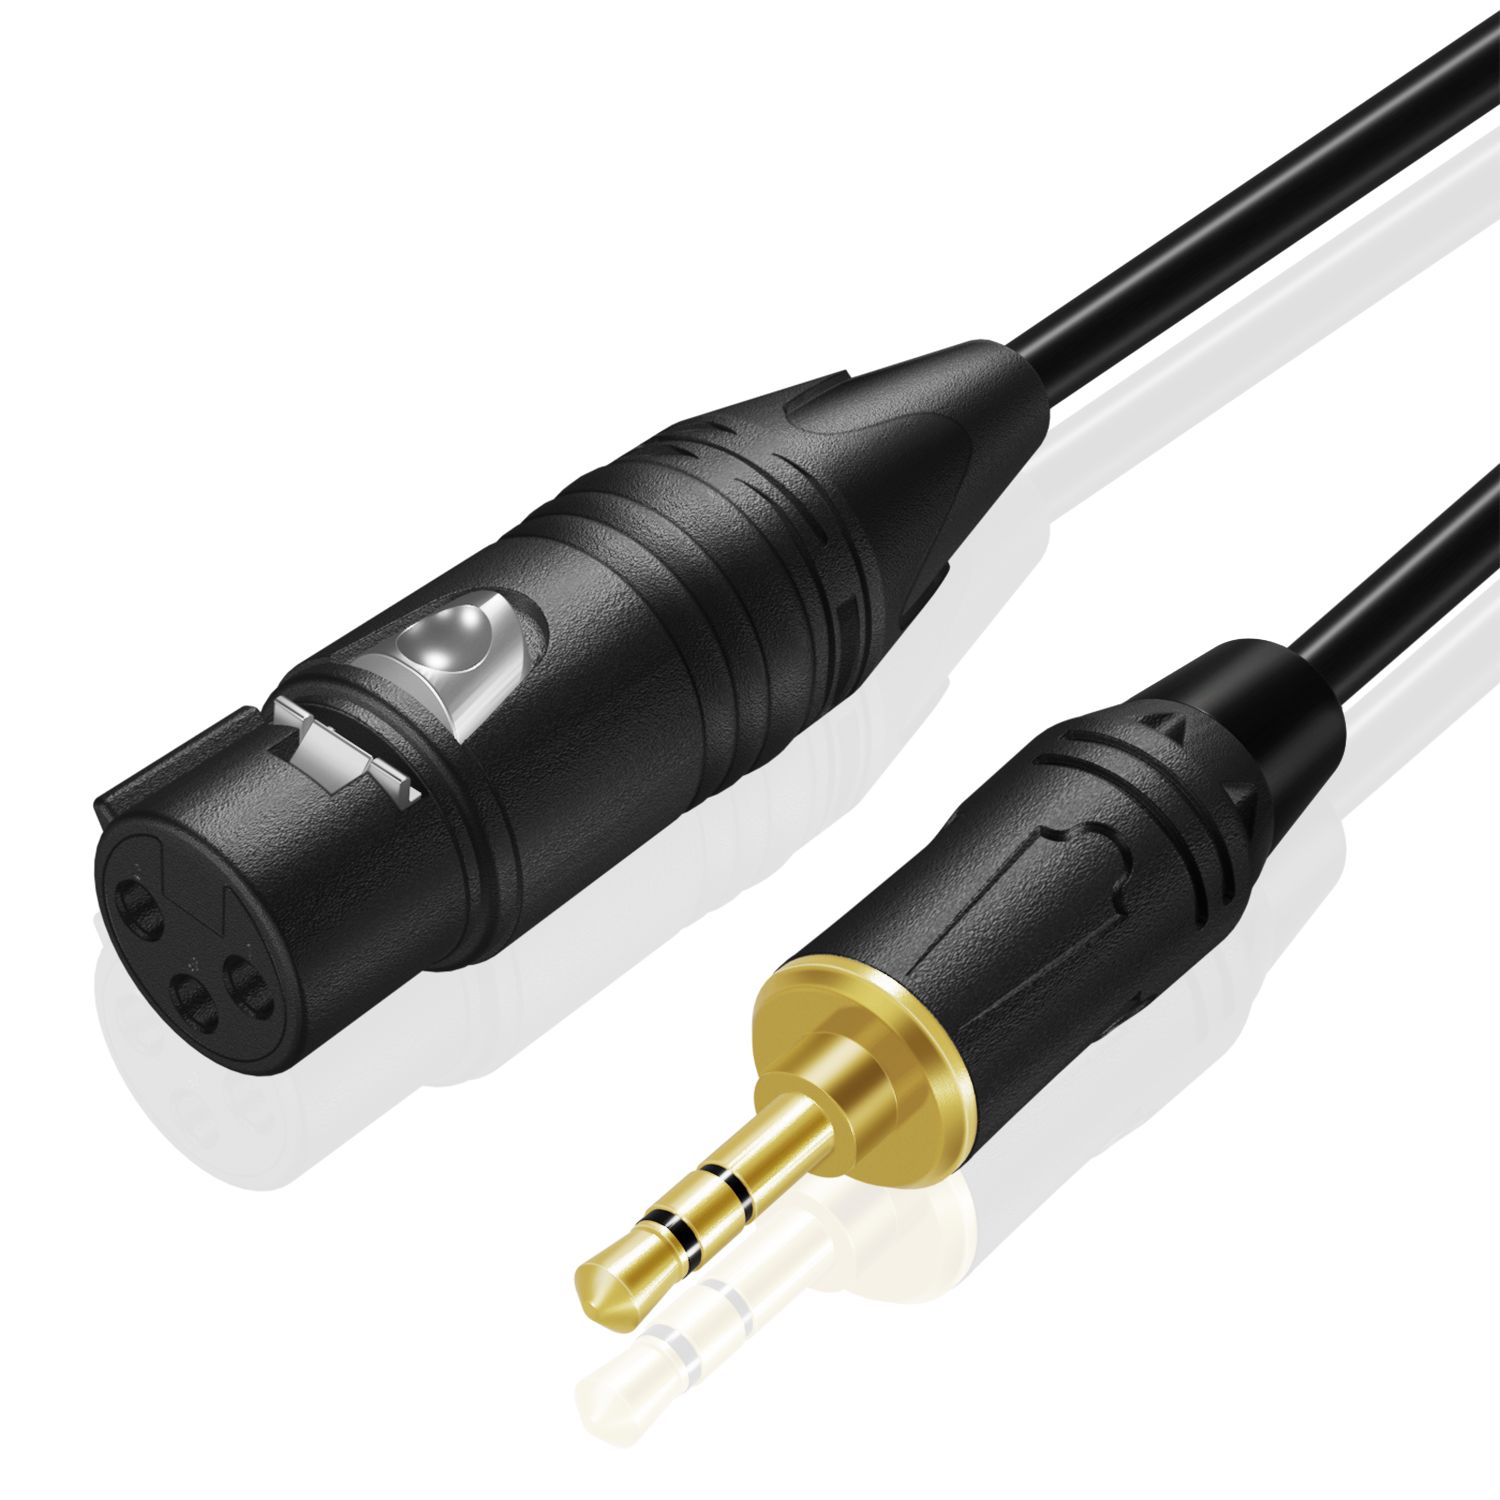 TNP Female XLR to 3.5mm (1/8 inch) - Aux to Microphone Stereo Cable for DSLR Camera, Computer, Laptop, Audio Equipment, Recording Device - High-Performance XLR to 1/8 Cable, 6 Feet